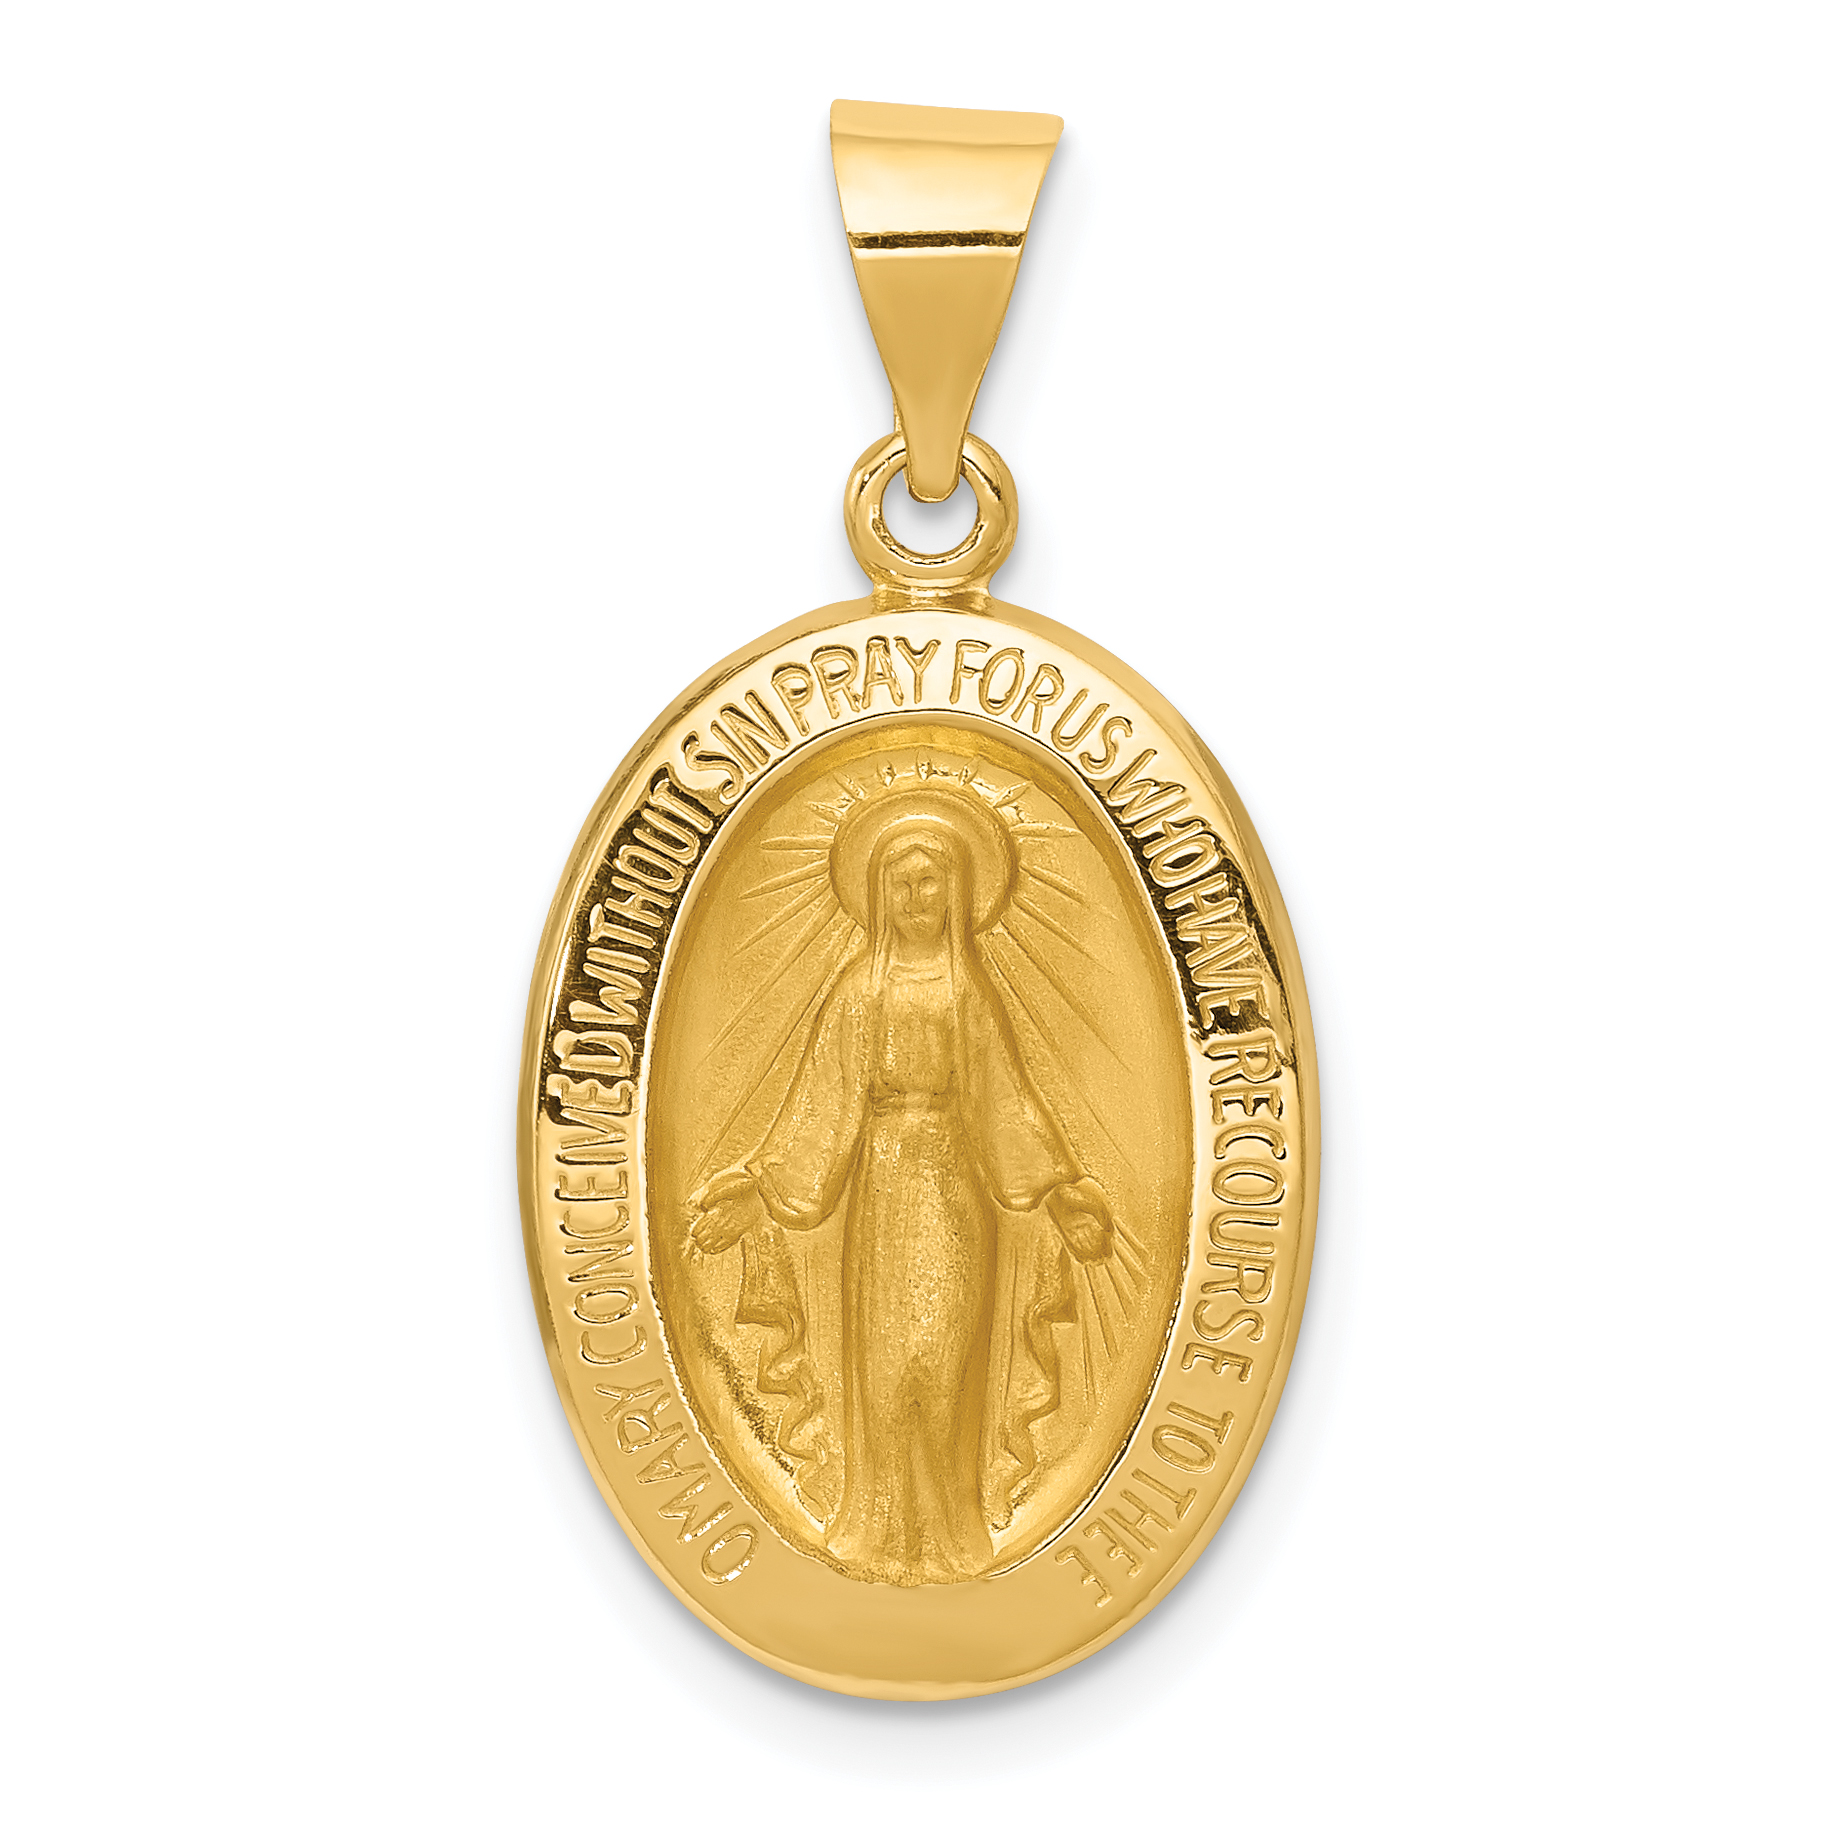 14k Yellow Gold Miraculous Medal Pendant Charm Necklace Religious Fine Jewelry 689738262609 | eBay